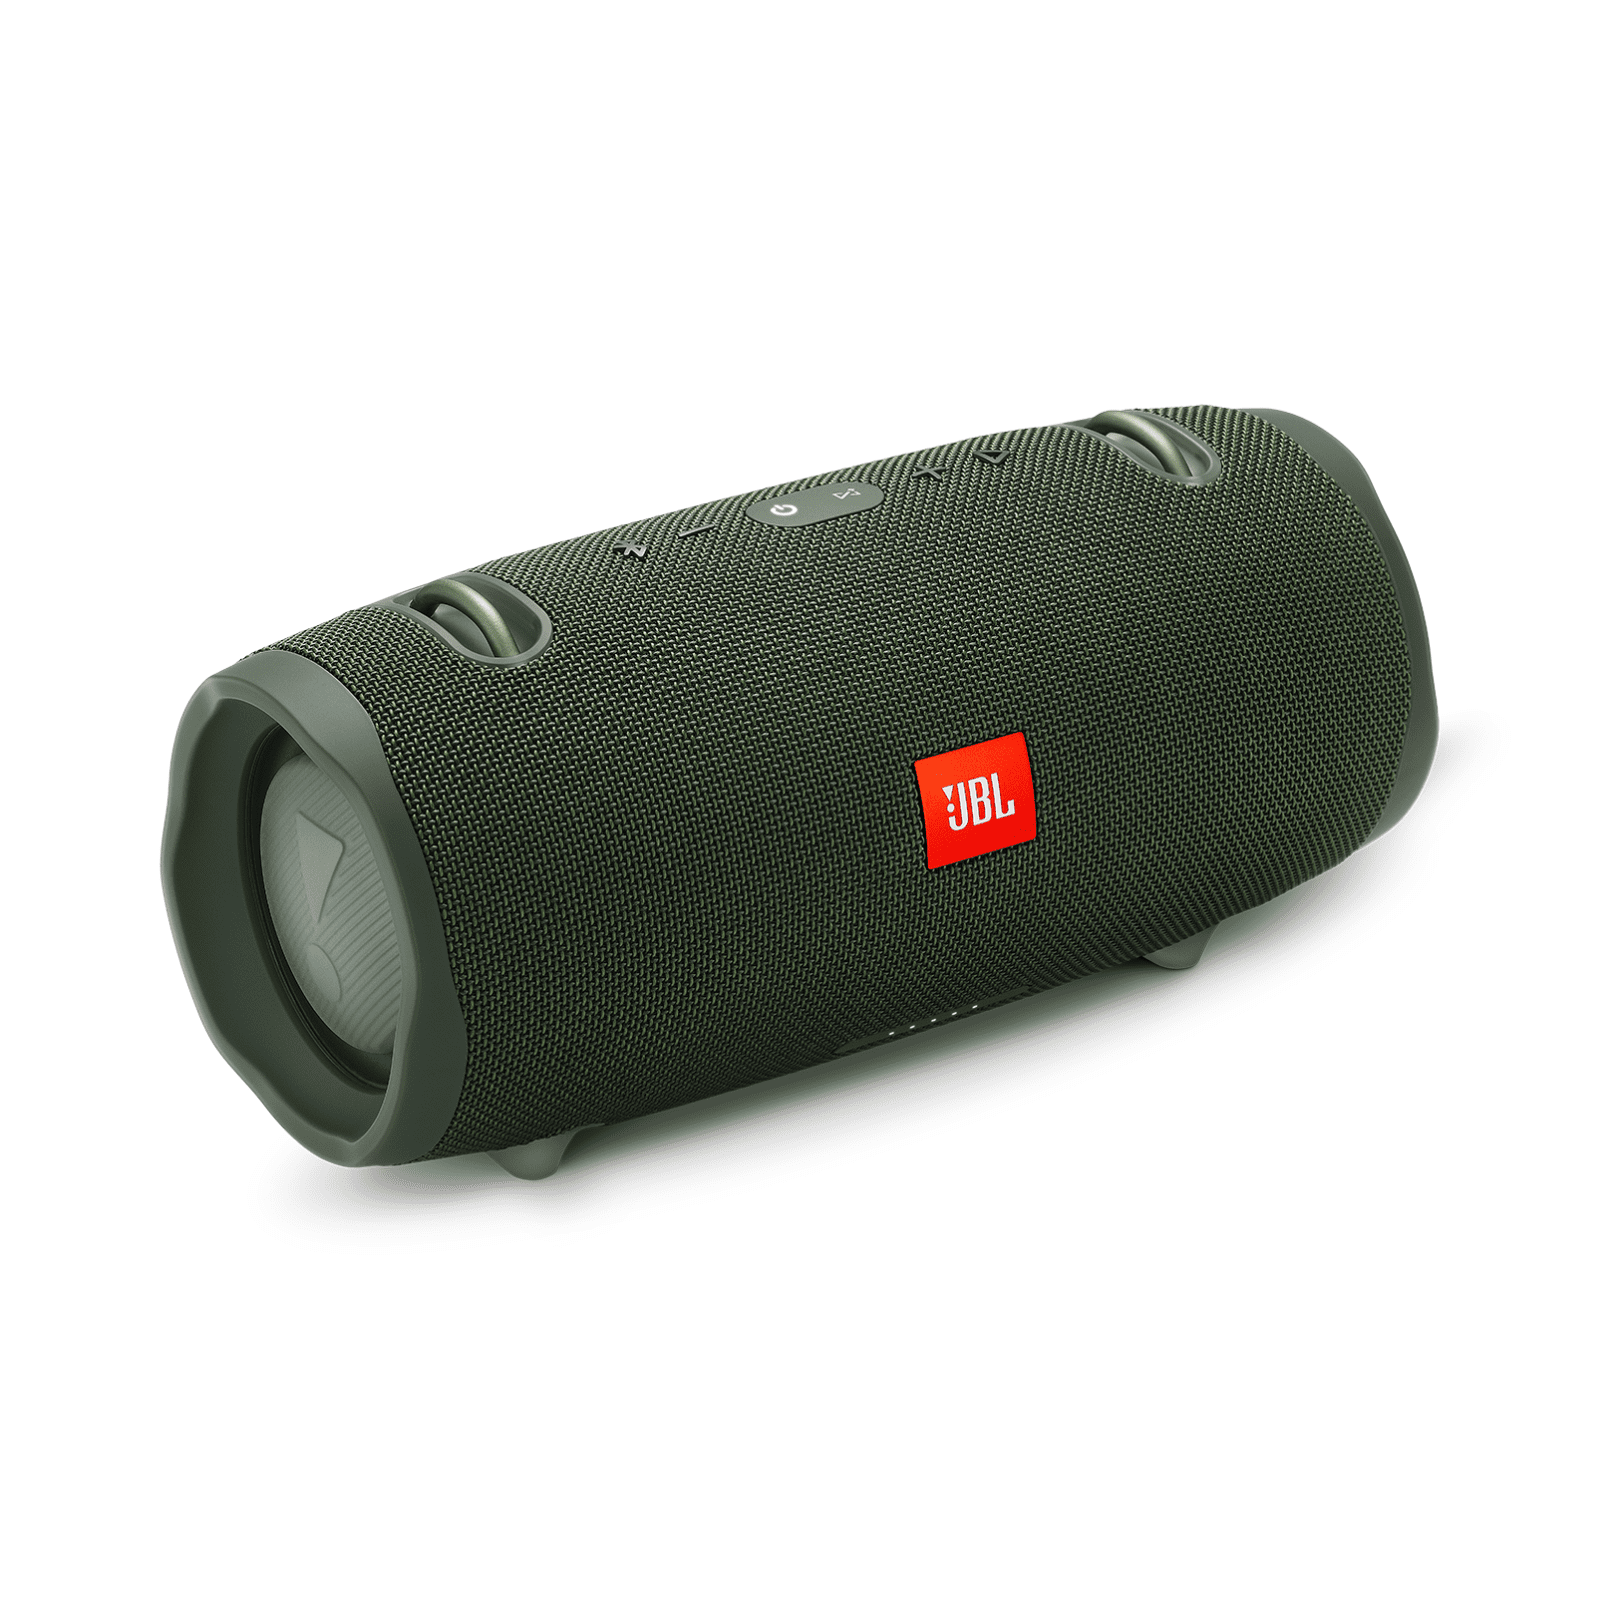 JBL Xtreme 2 Portable Wireless Bluetooth Speakers - Pair (Red)